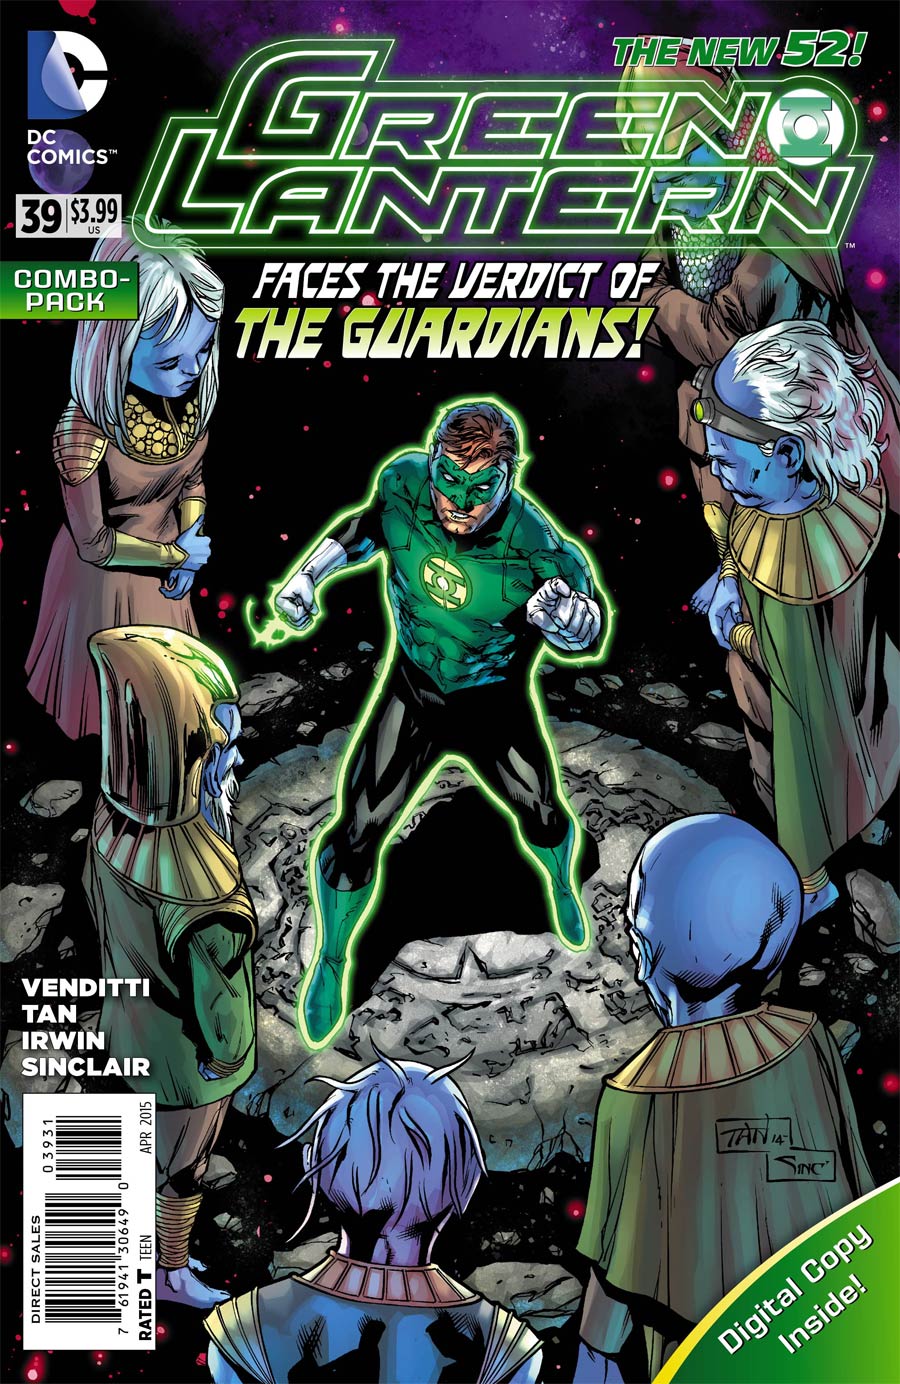 Green Lantern Vol 5 #39 Cover D Combo Pack Without Polybag